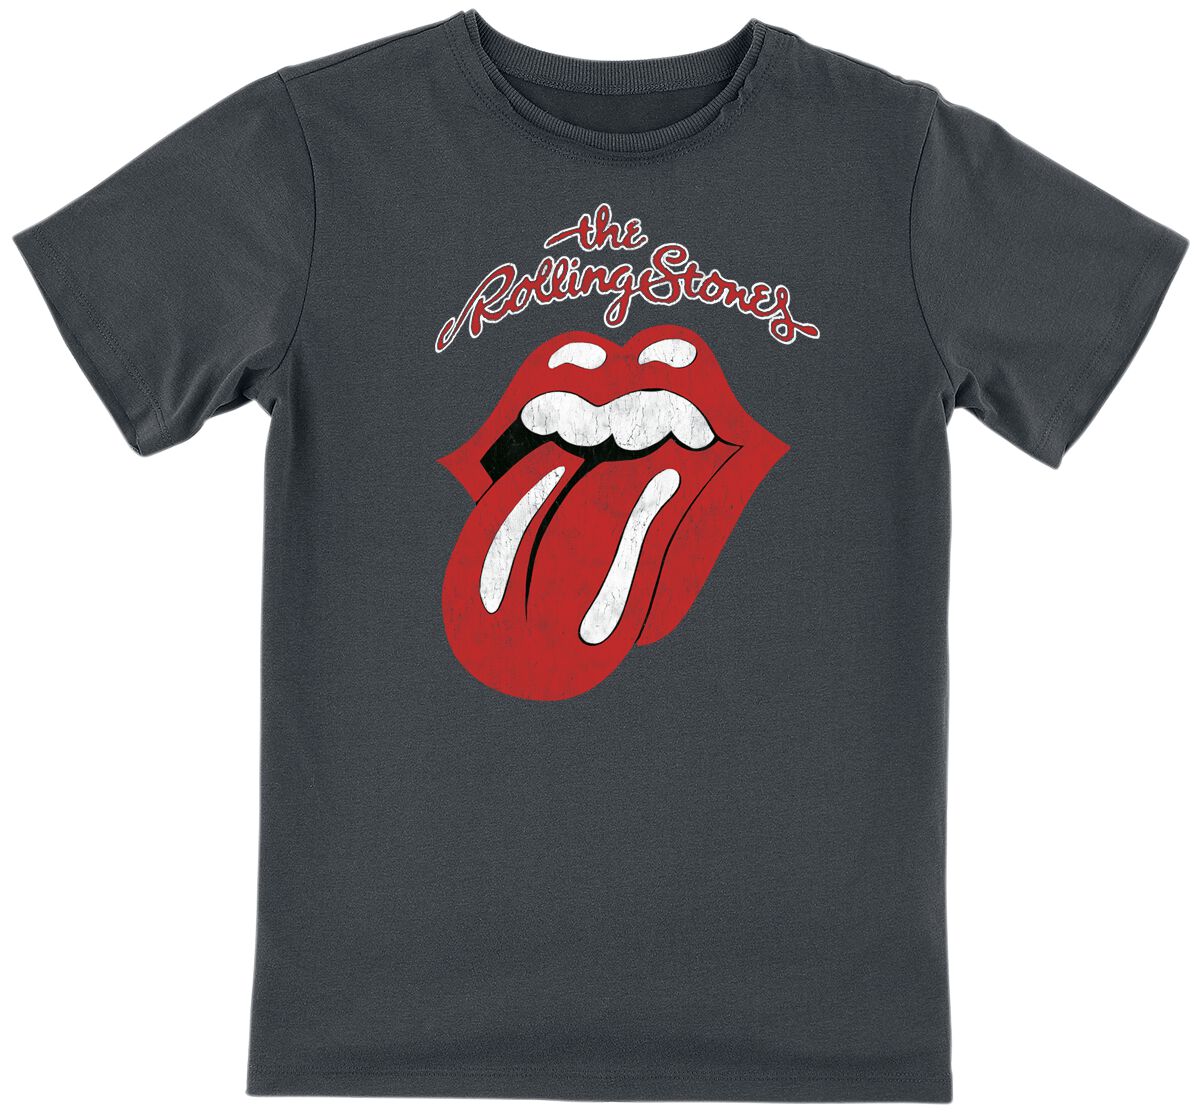 The Rolling Stones Amplified Collection - Square Tongue T-Shirt charcoal in 128